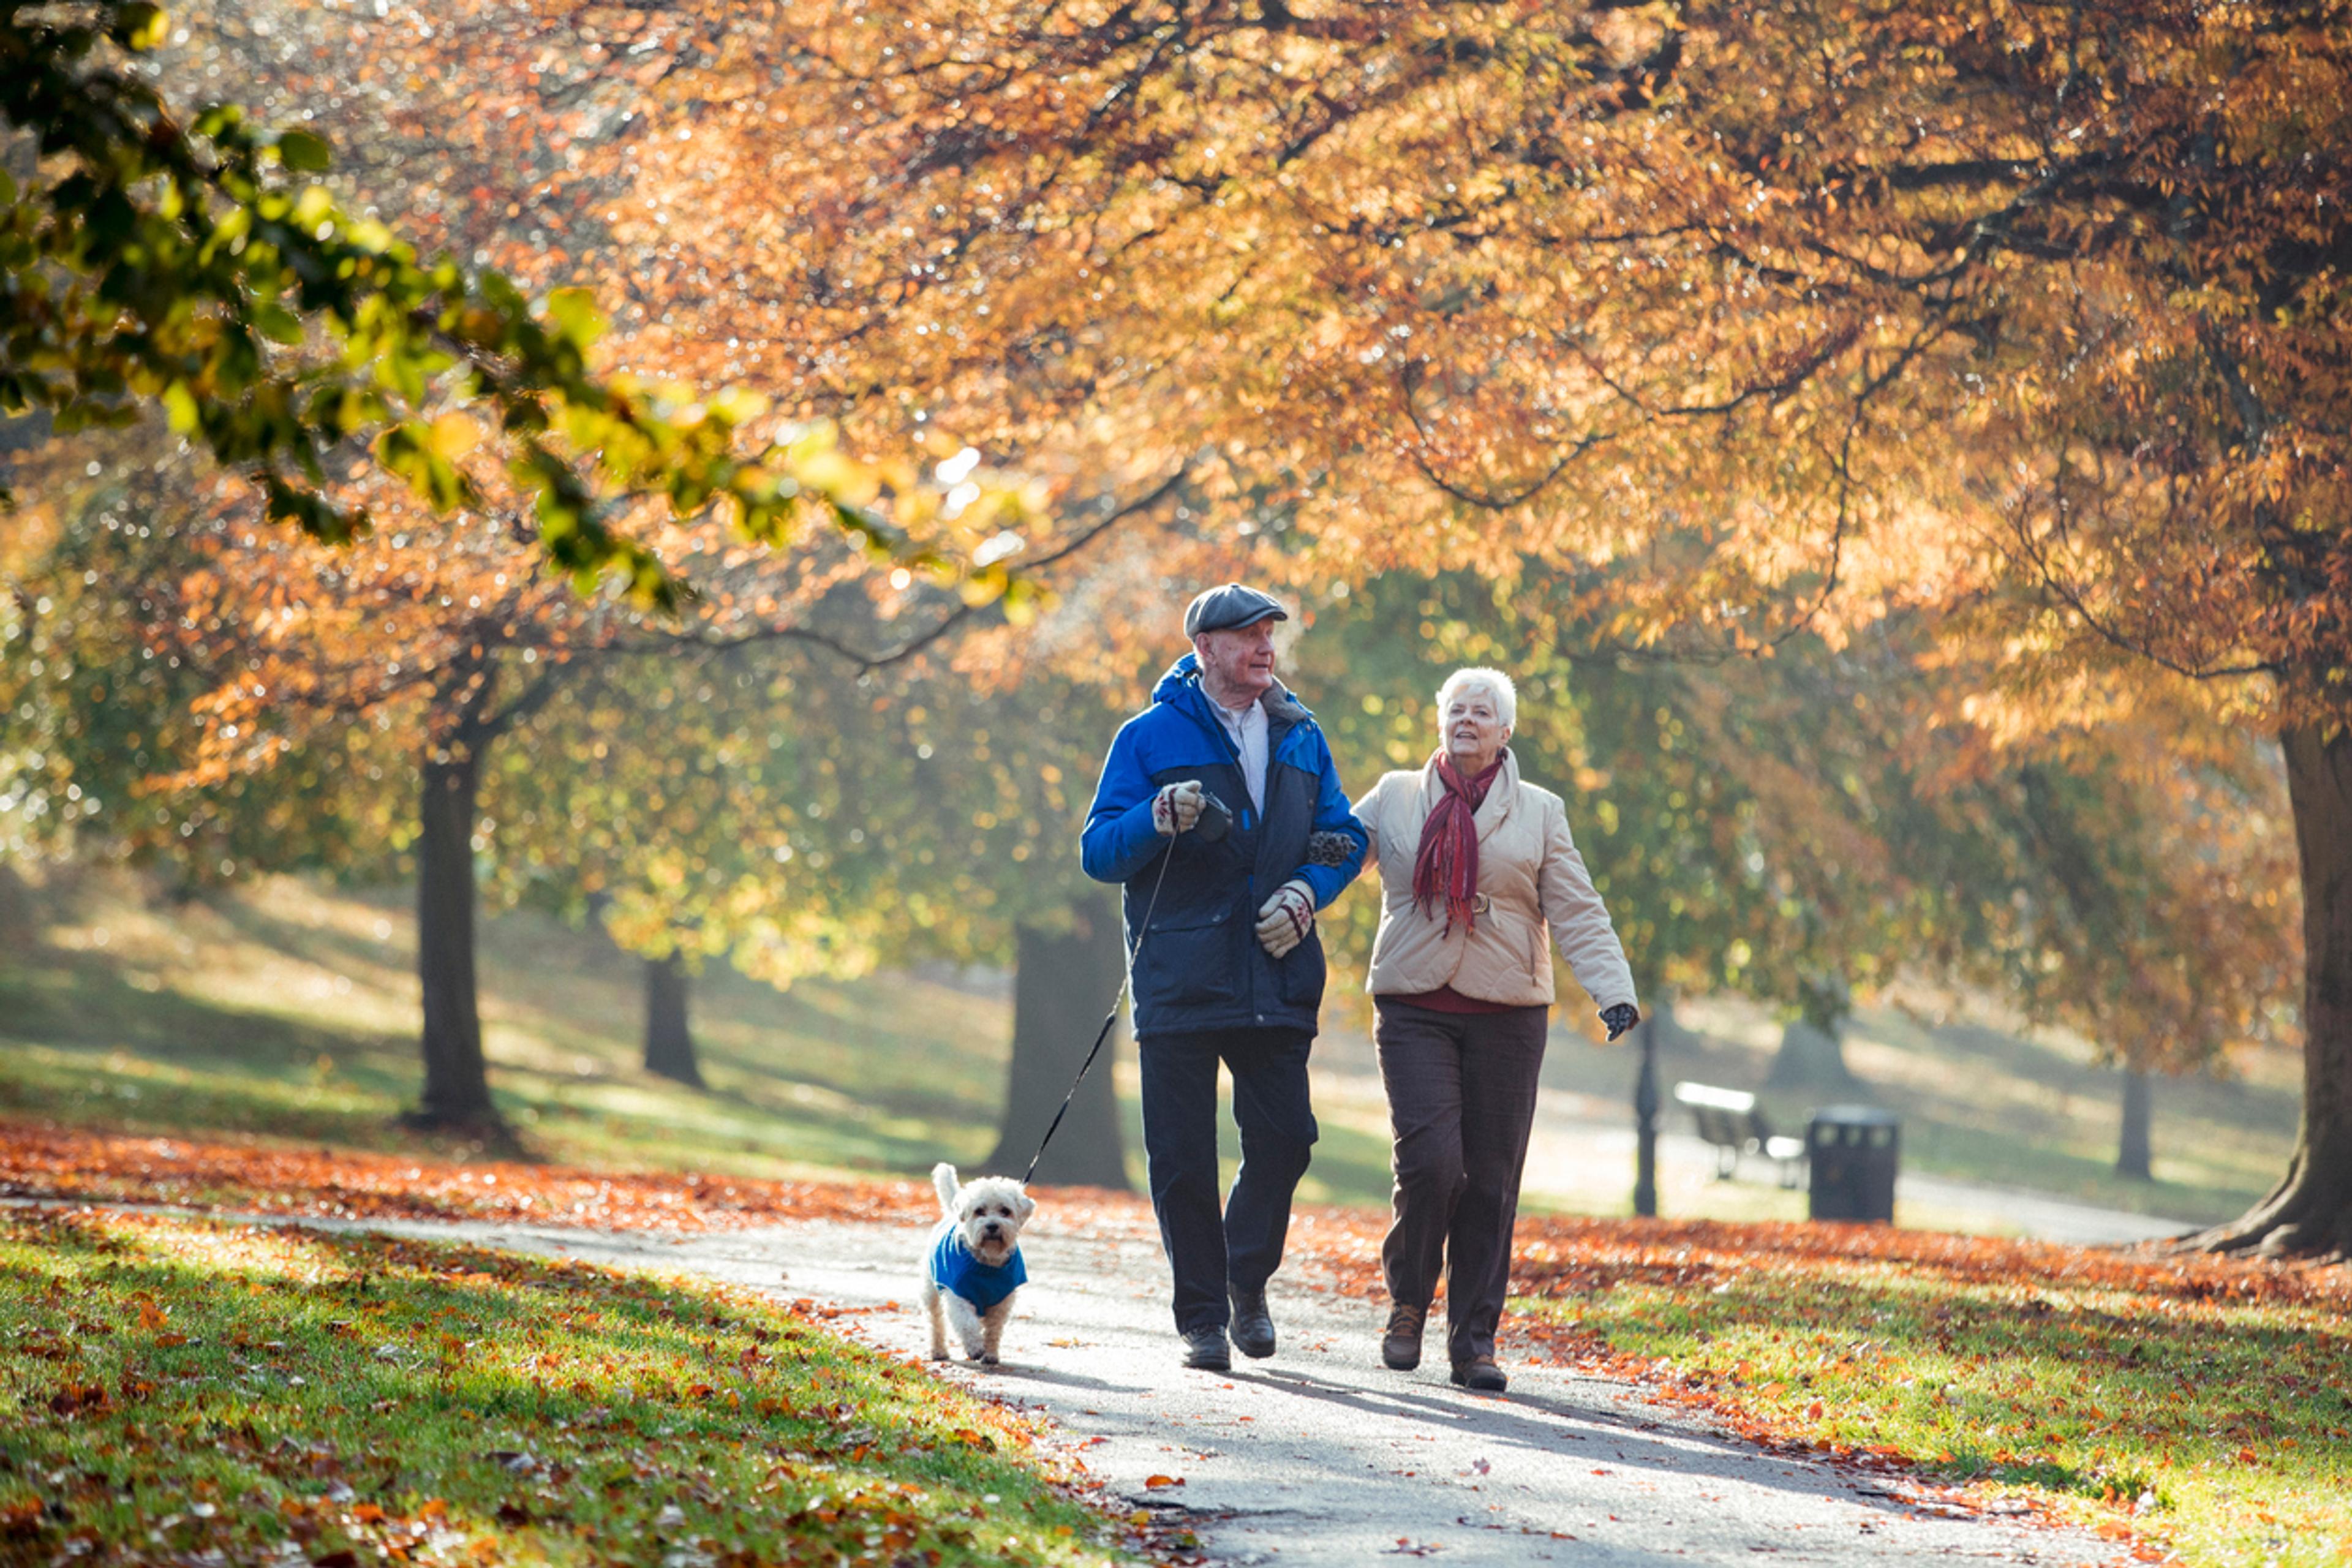 An elderly man and a woman on an autumnal walk with their white dog